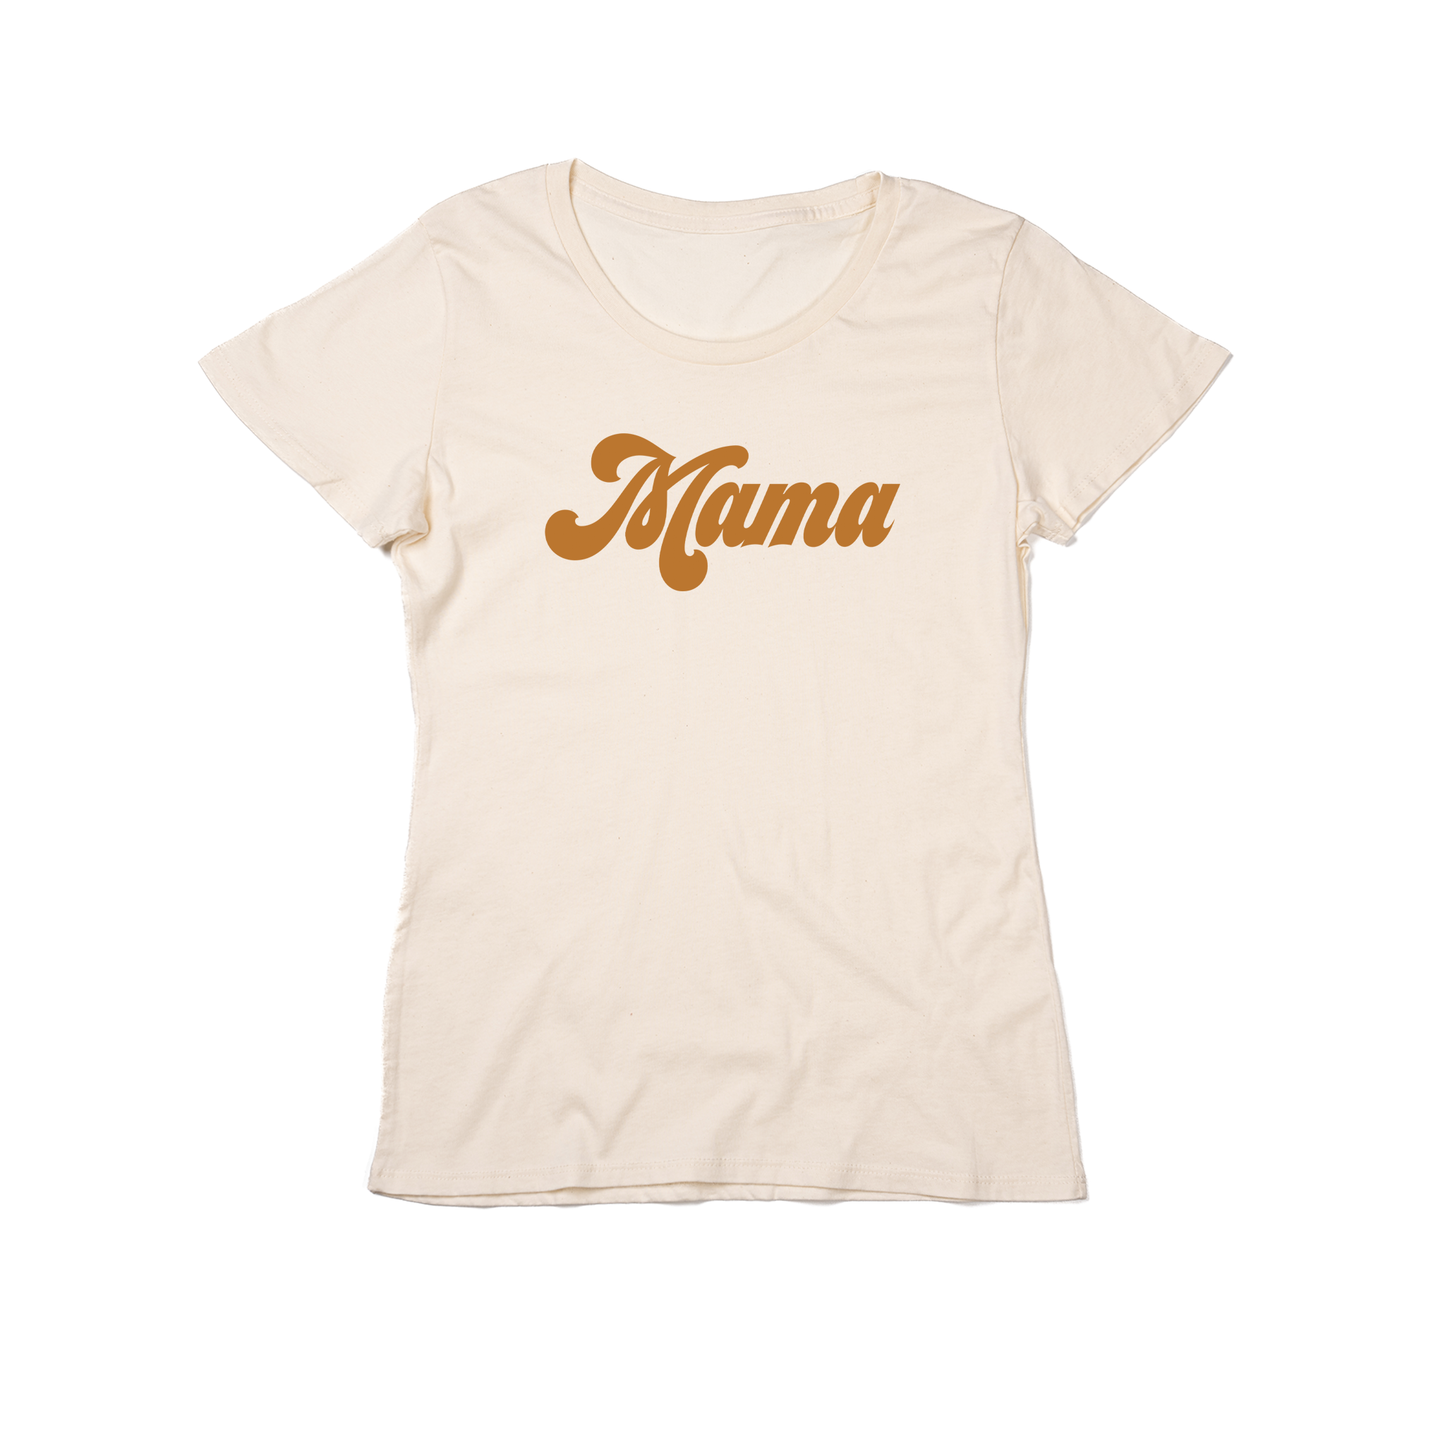 Mama (Retro, Camel) - Women's Fitted Tee (Natural)